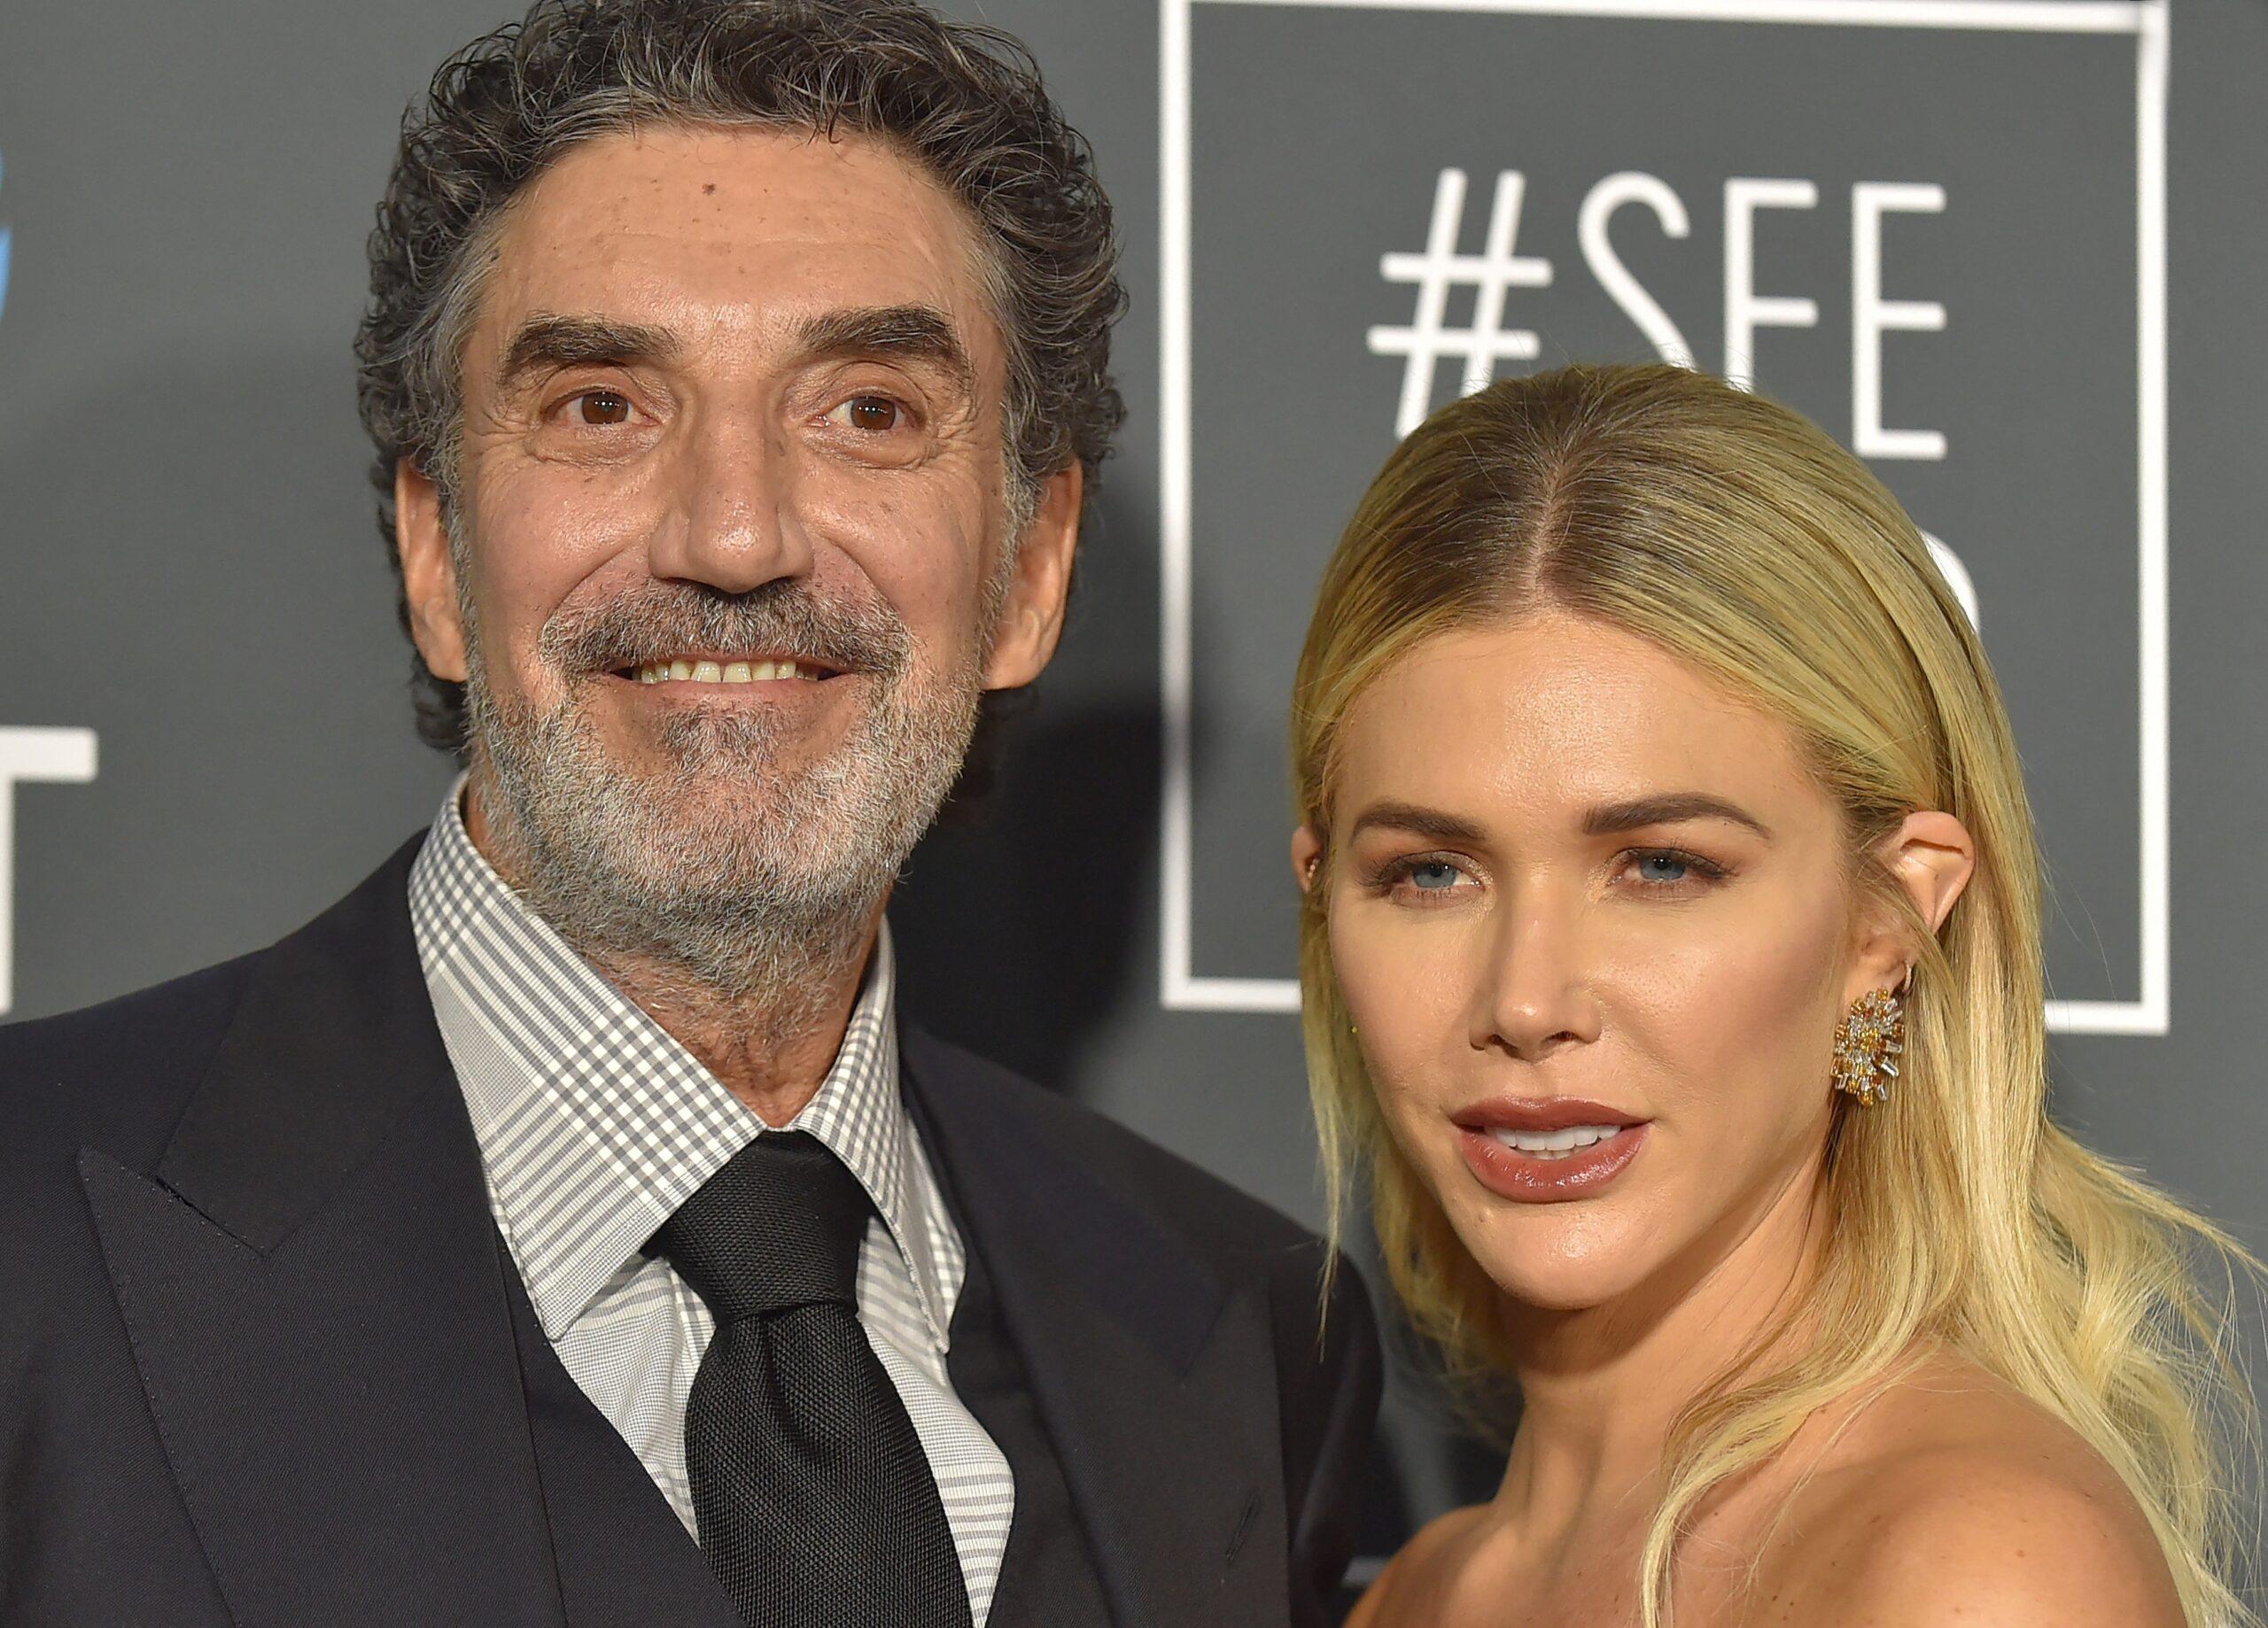 Chuck Lorre and Arielle Mandelson attend the 24th Annual Critics' Choice Awards